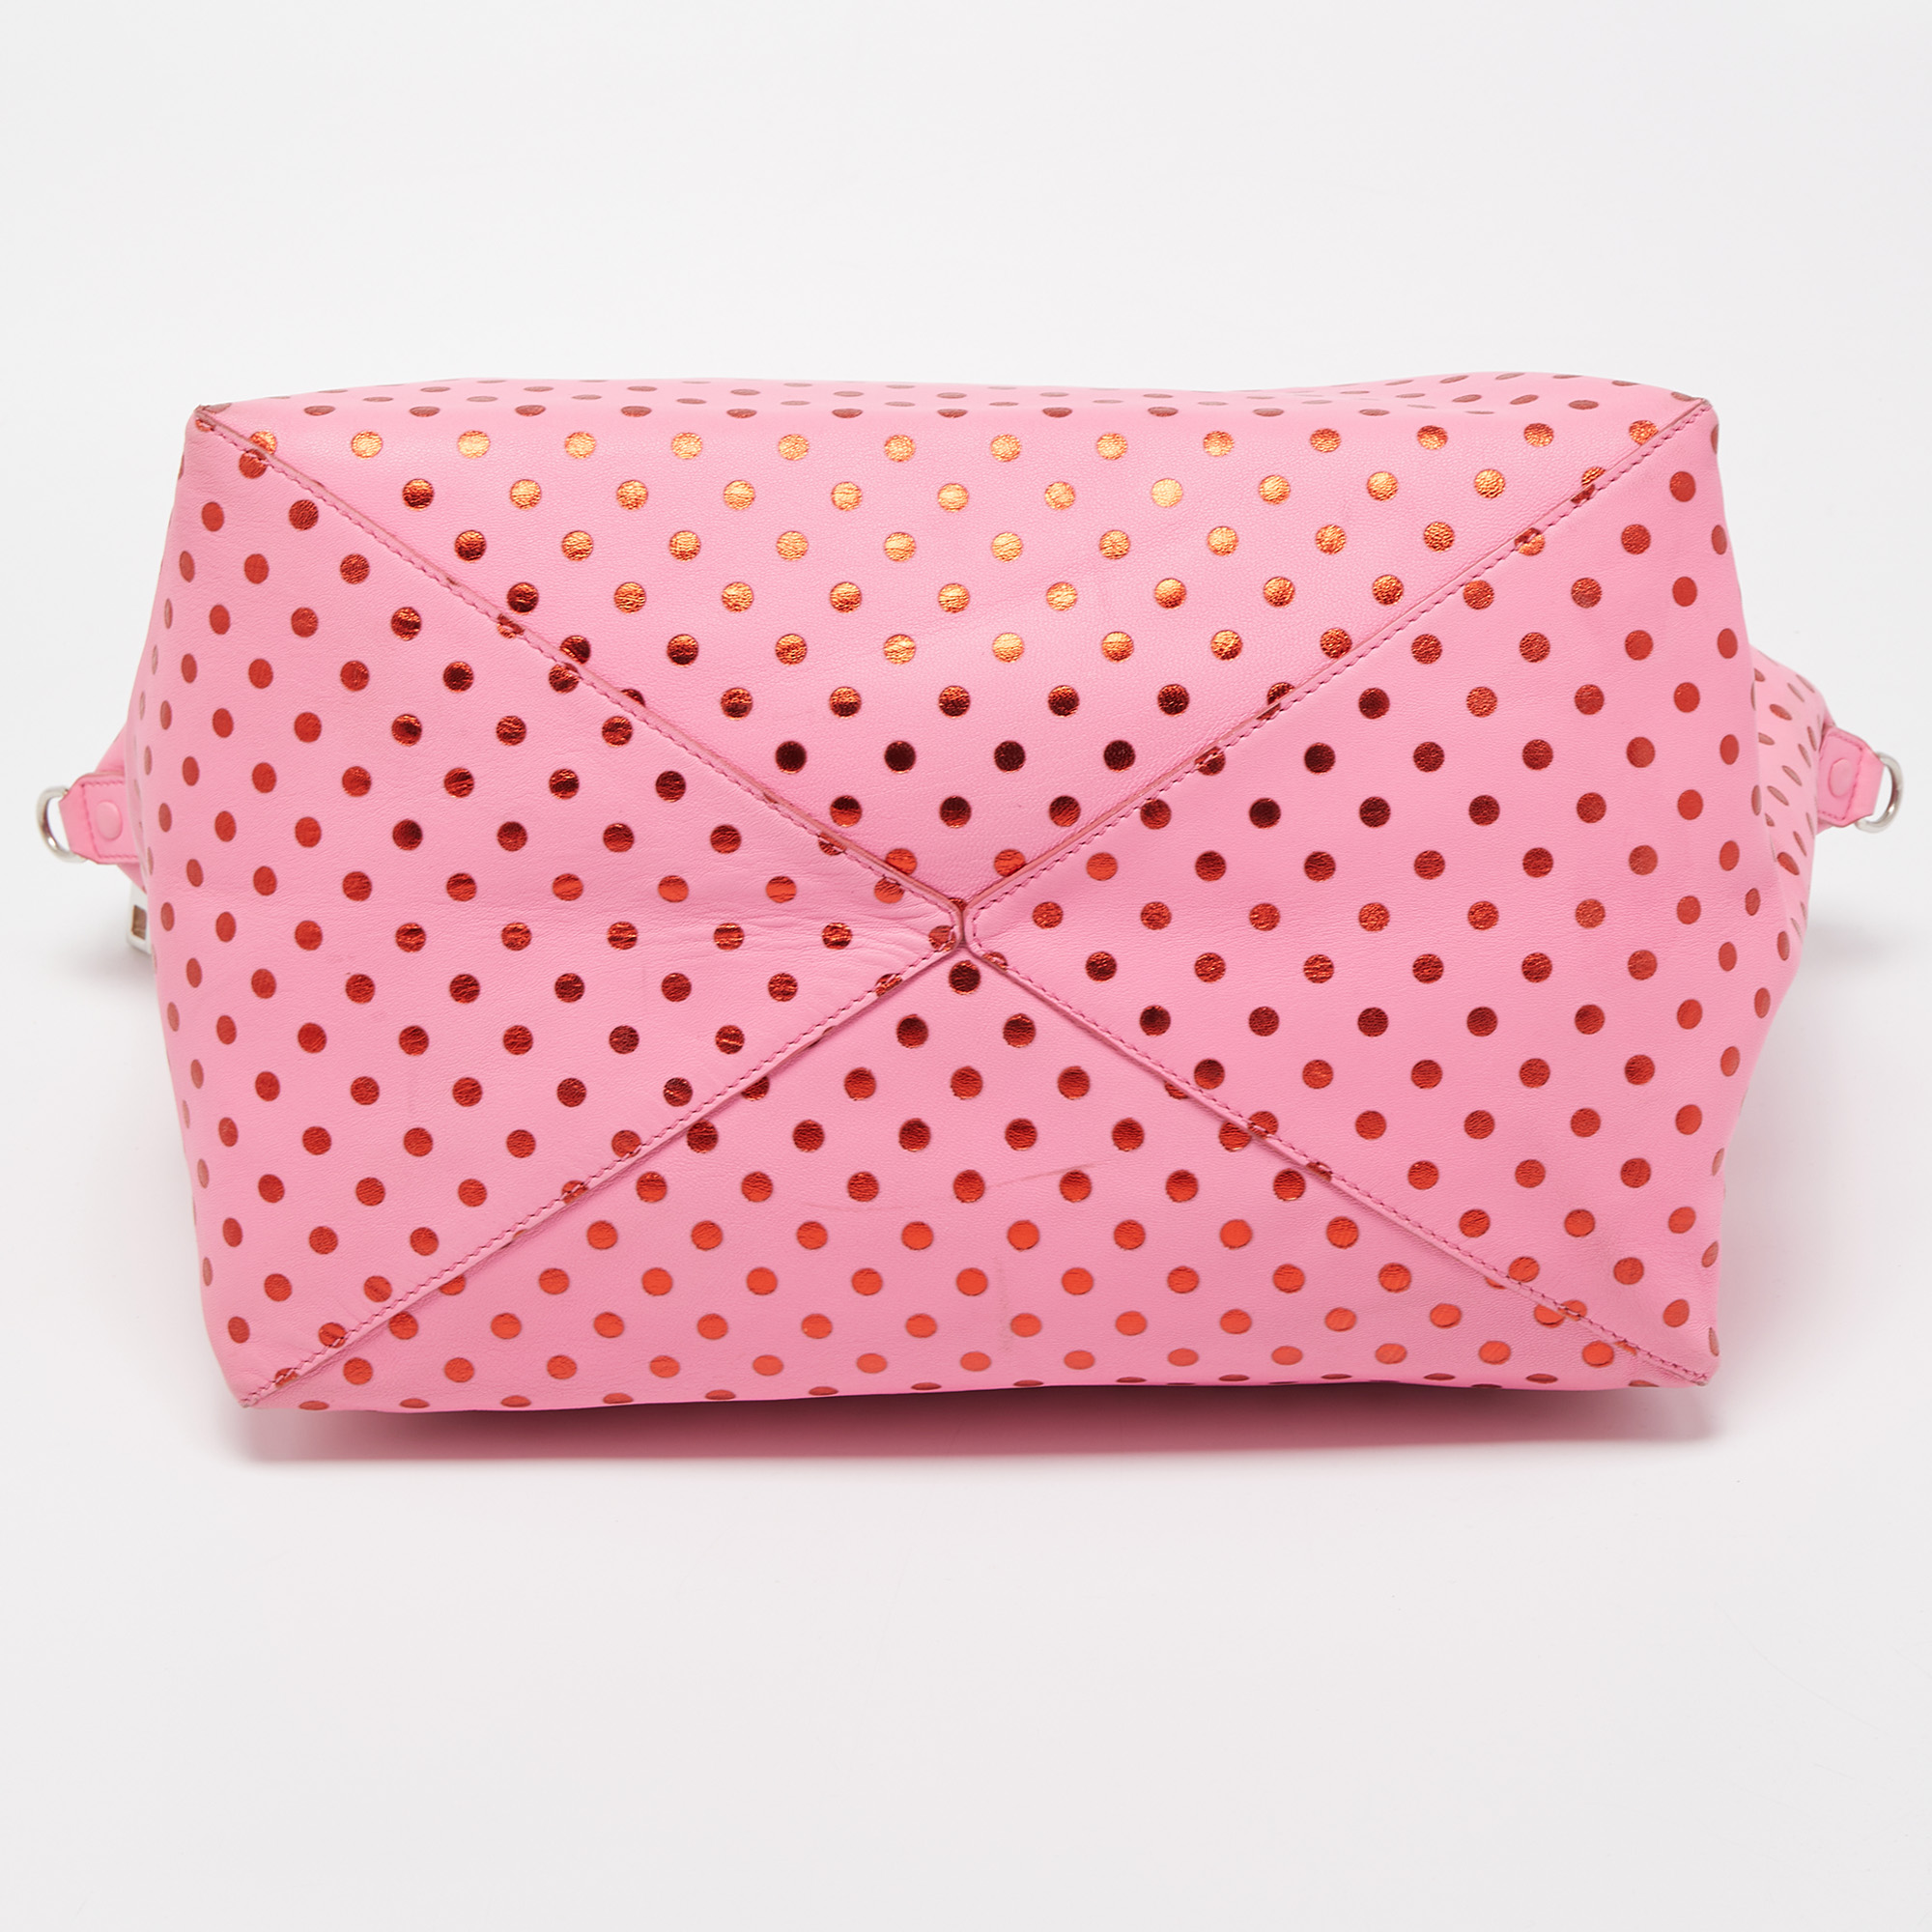 Marc Jacobs Pink Leather Polka Dot Zip Tote